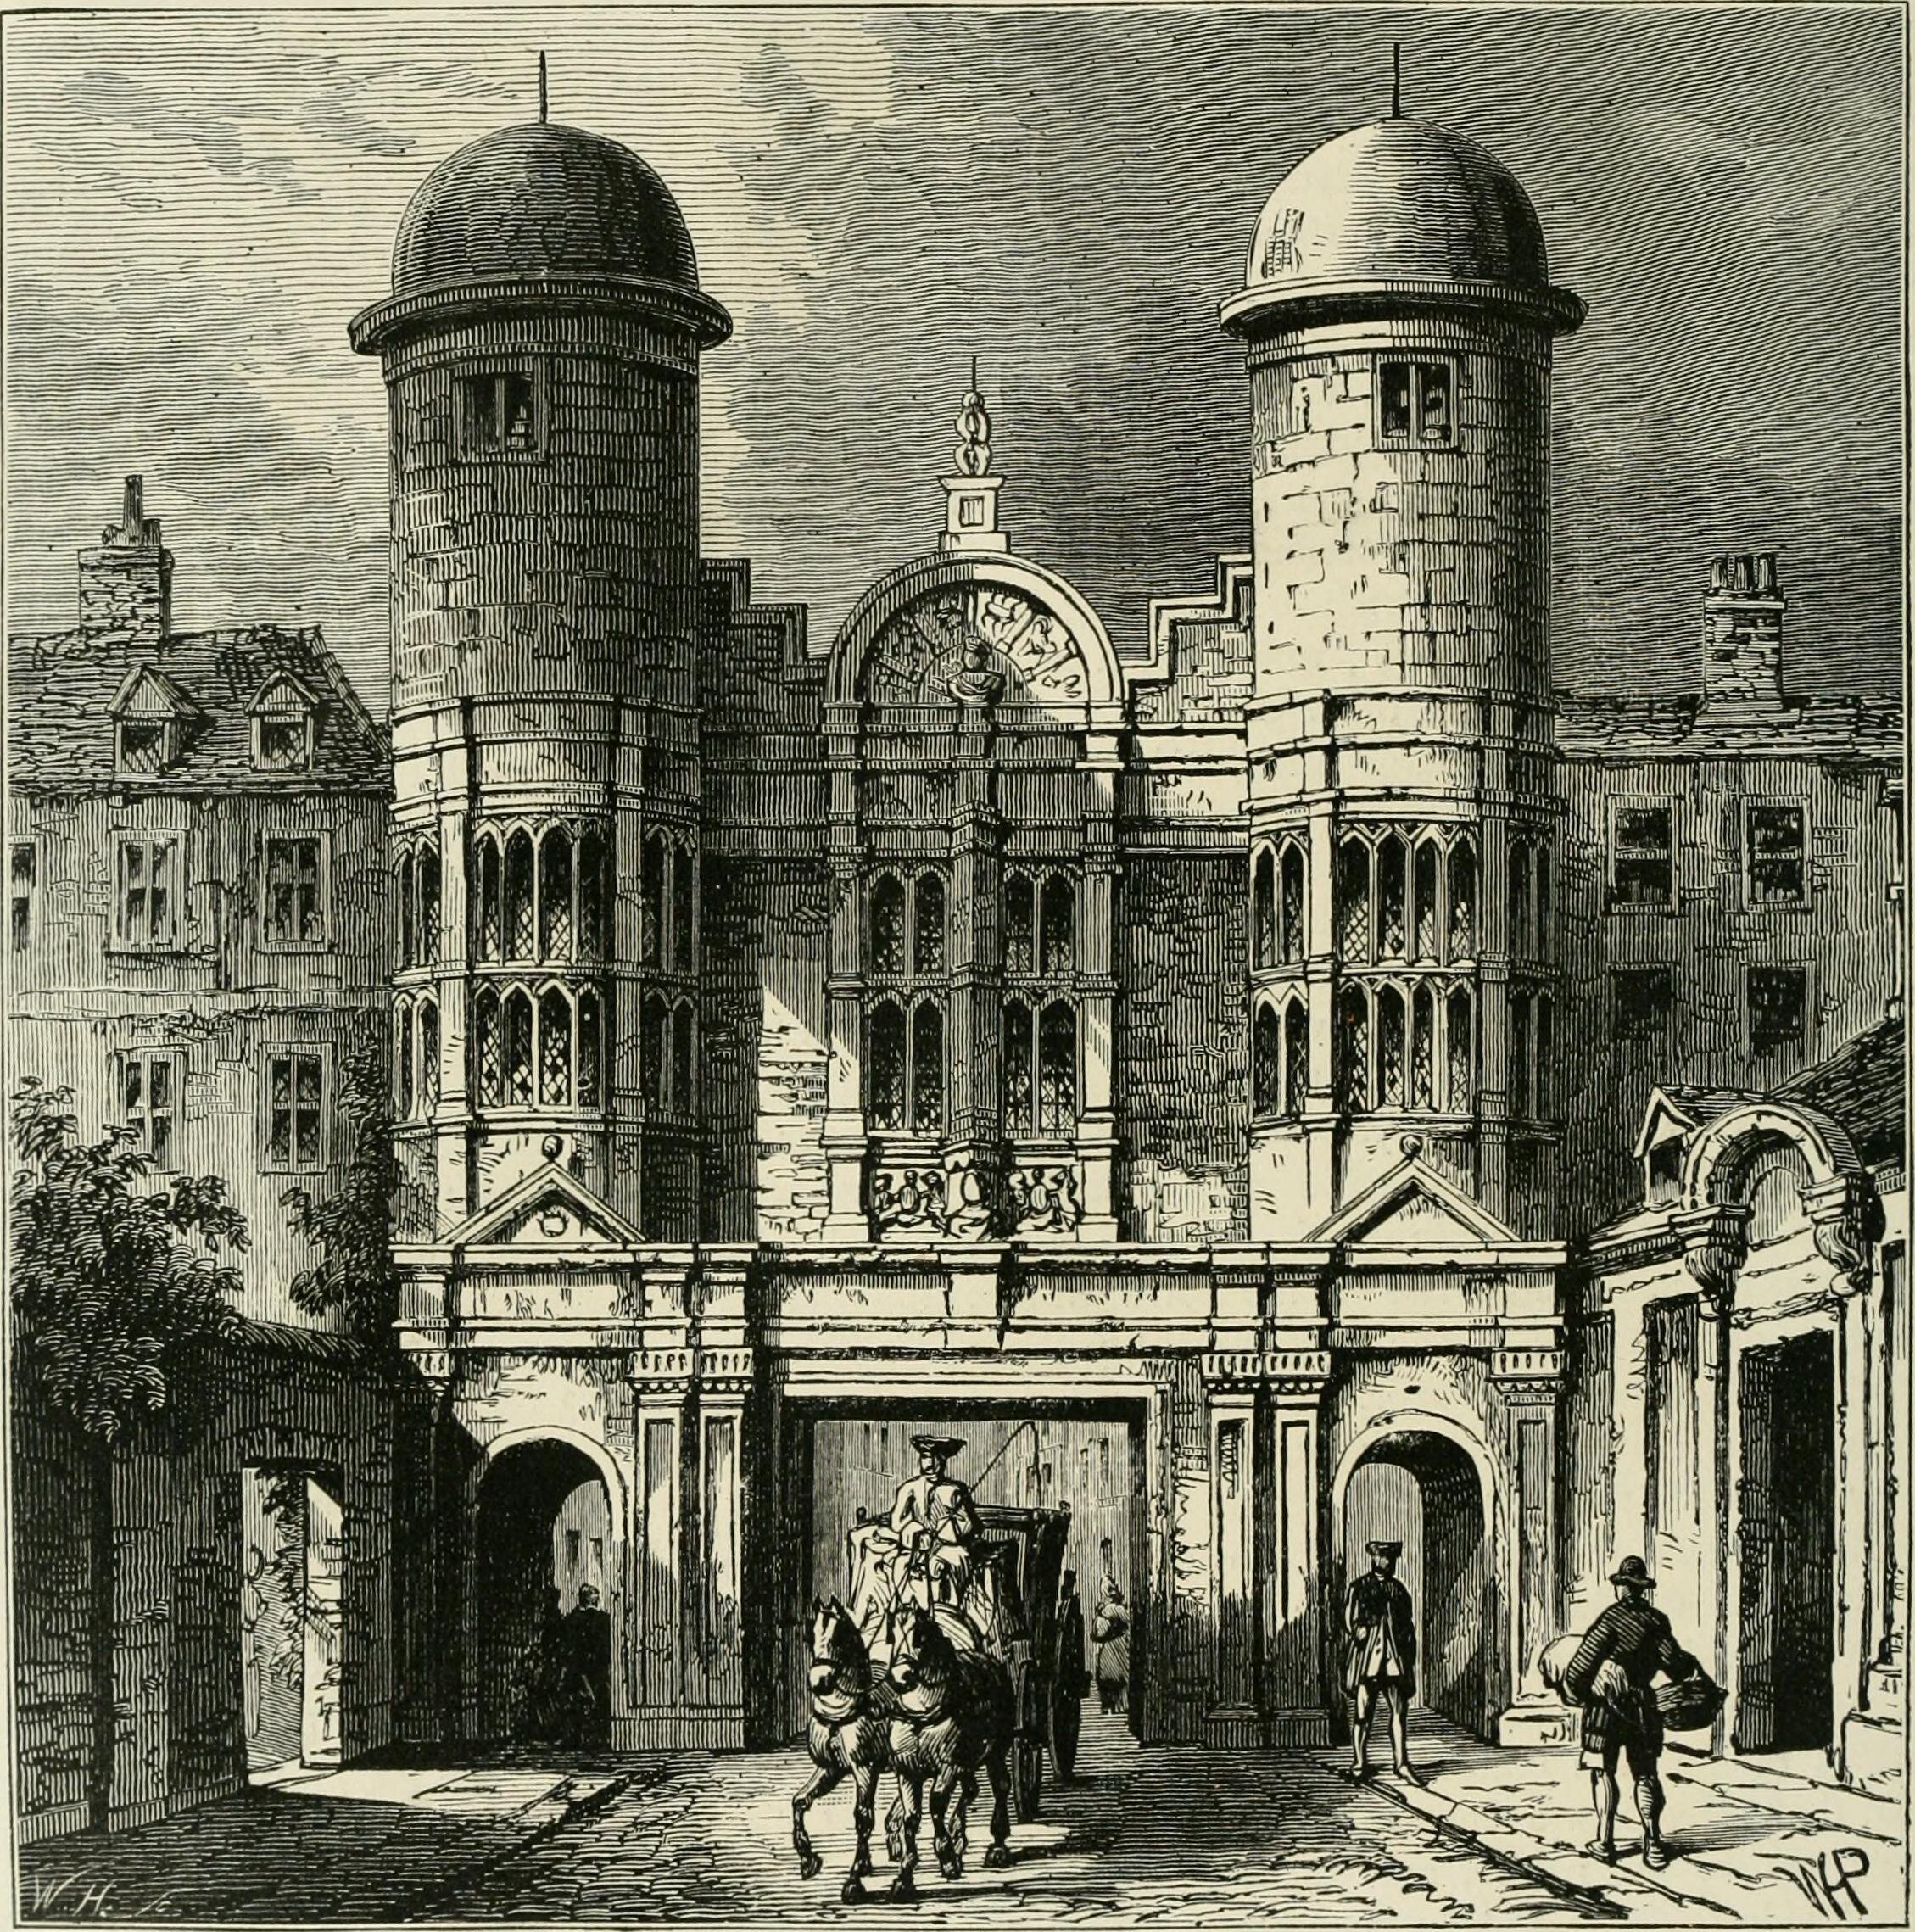 Whitehall Palace; Henry VIIIs magnificent palace that has disappeared! — Seeing the past